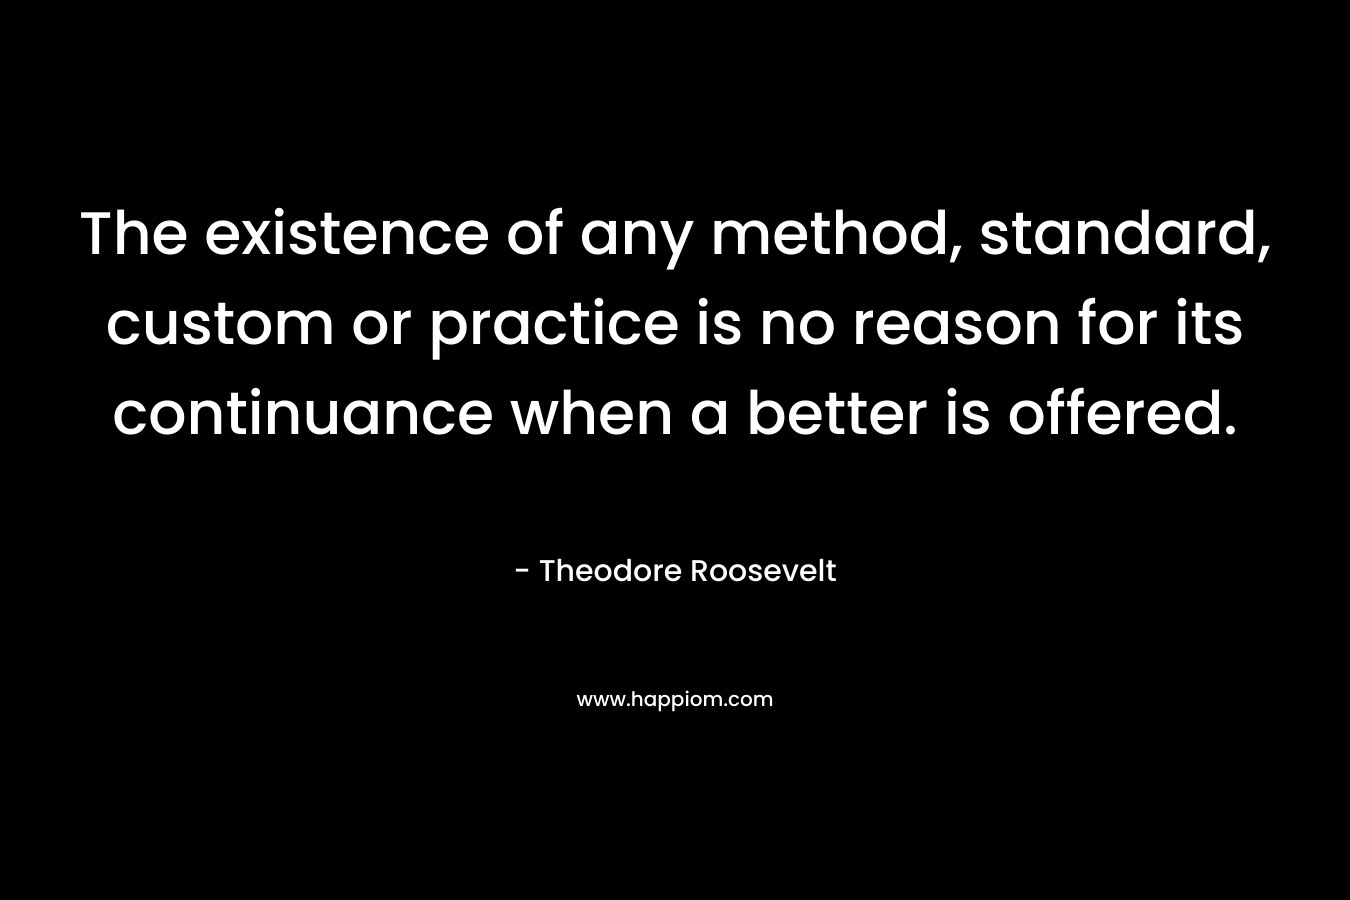 The existence of any method, standard, custom or practice is no reason for its continuance when a better is offered. – Theodore Roosevelt